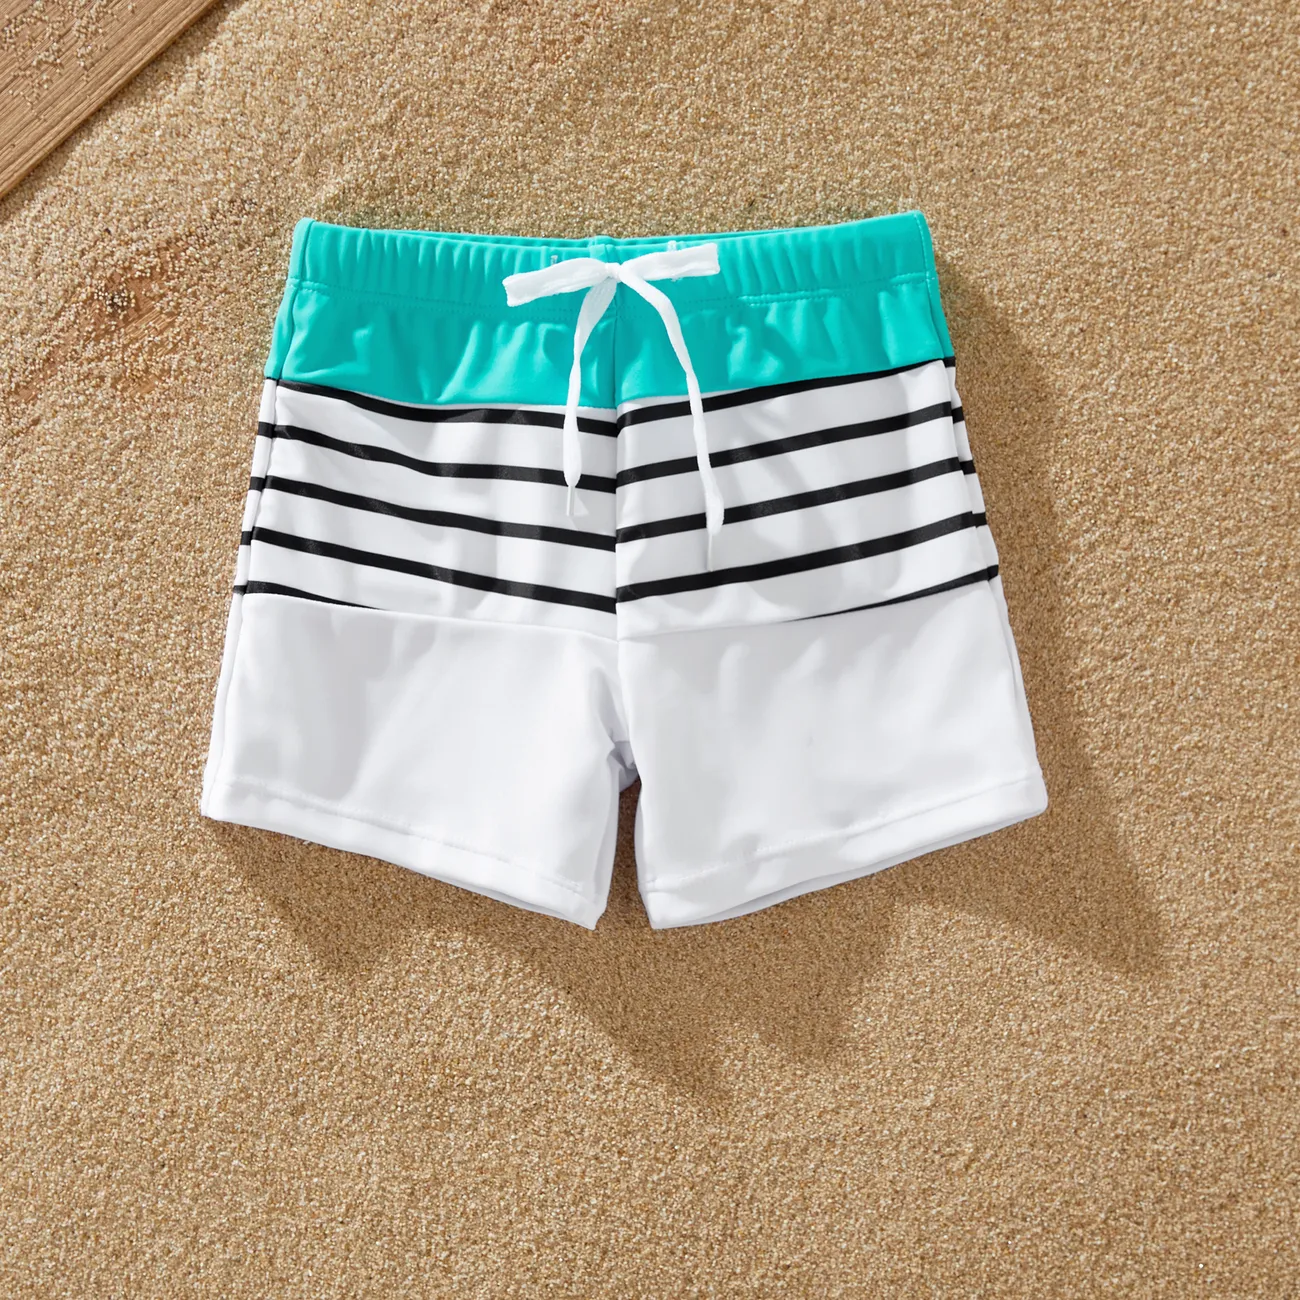 Family Matching Striped Spliced Cut Out One-piece Swimsuit and Colorblock Swim Trunks Green/White big image 1